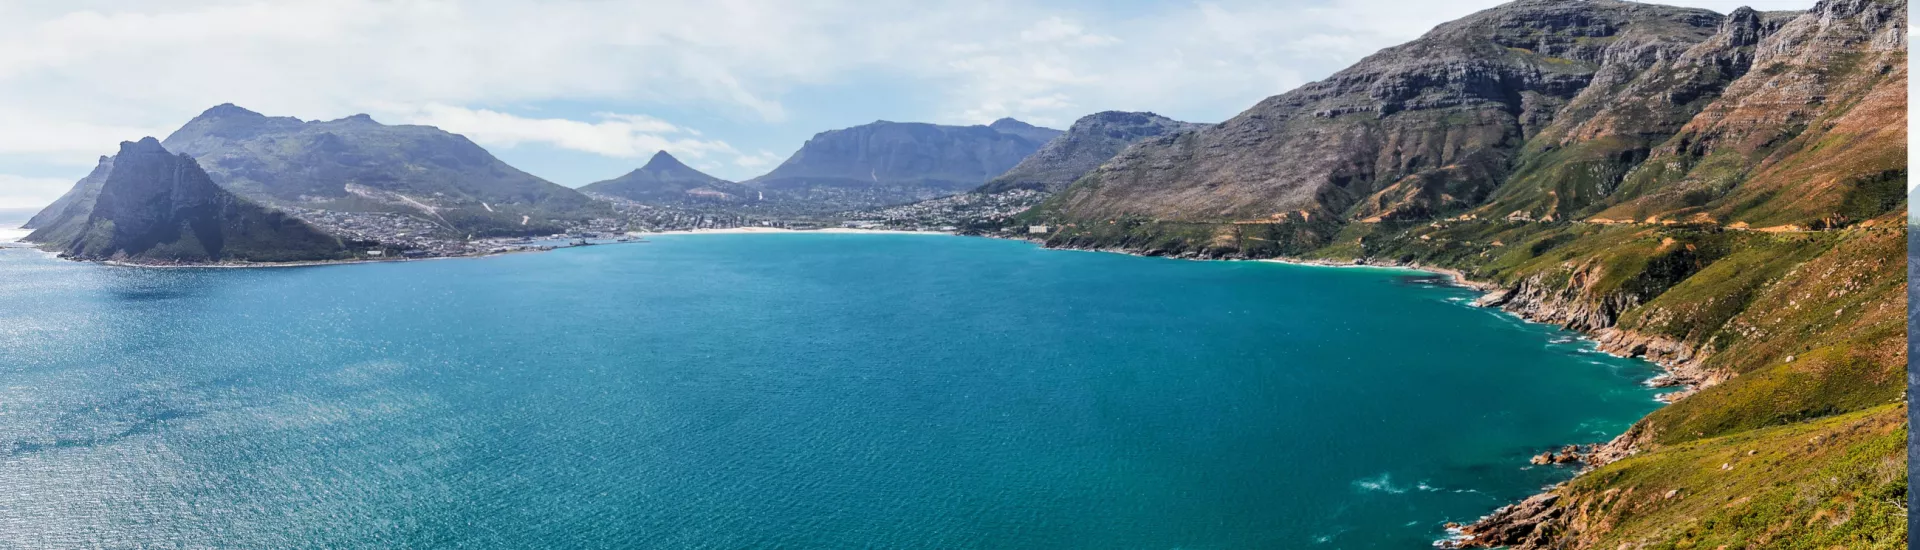 Hout Bay Panorama, Cape Town, South Africa 